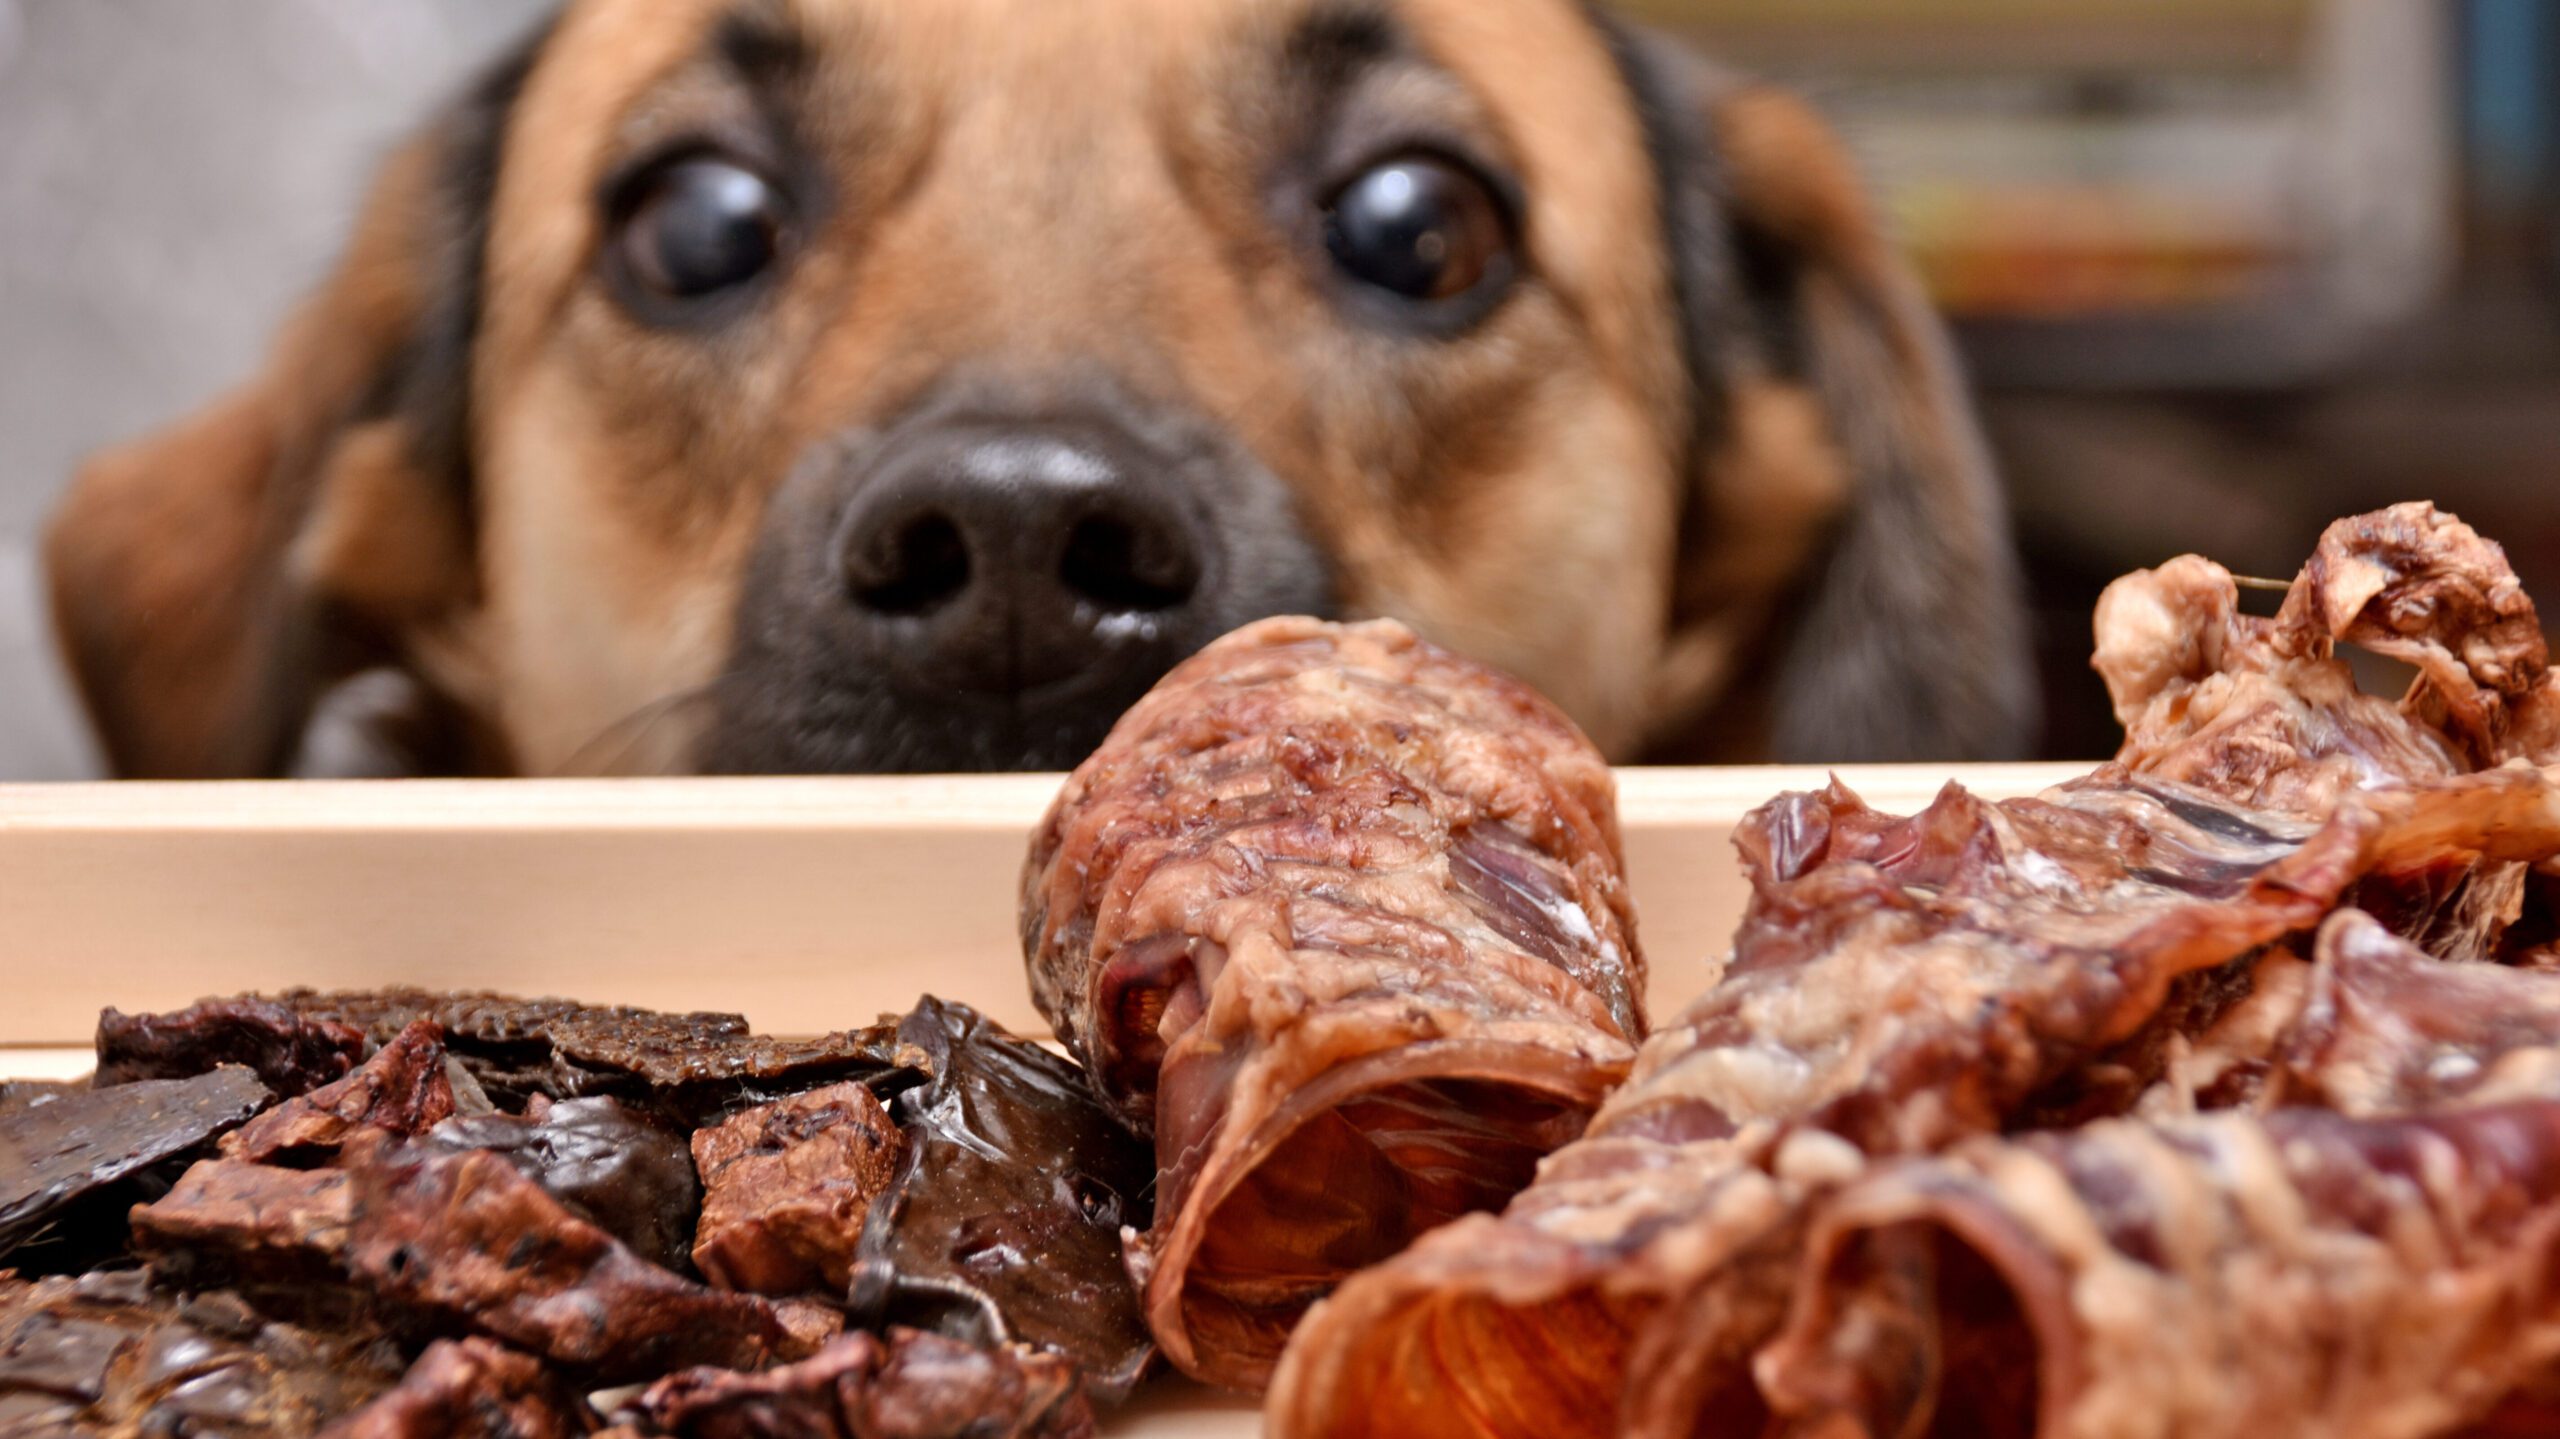 Cute dog staring at a big plate of dog treats and bones. It's important to know about hazardous foods for dogs to keep your pet healthy